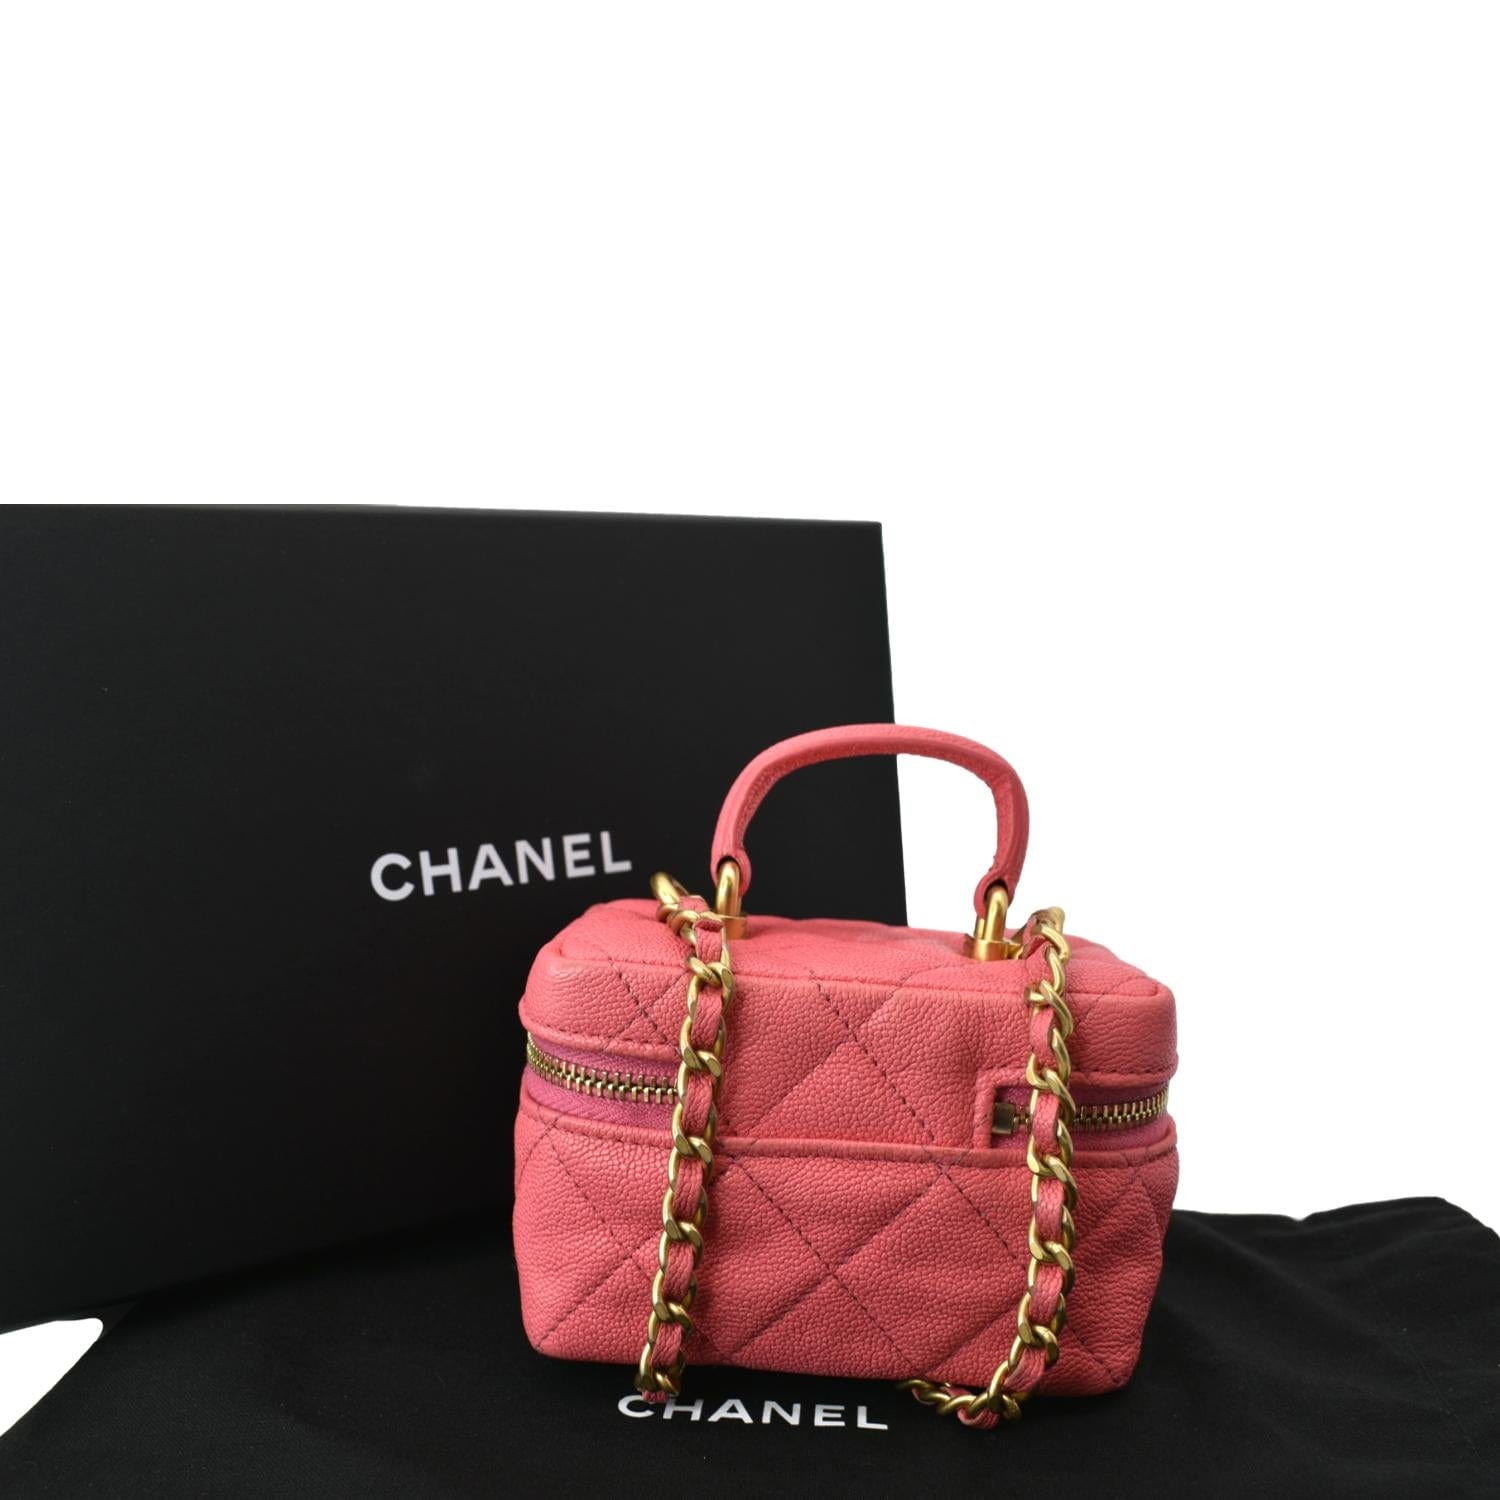 clip-on Chanel Vanity Case Small Leather Crossbody Bag Pink